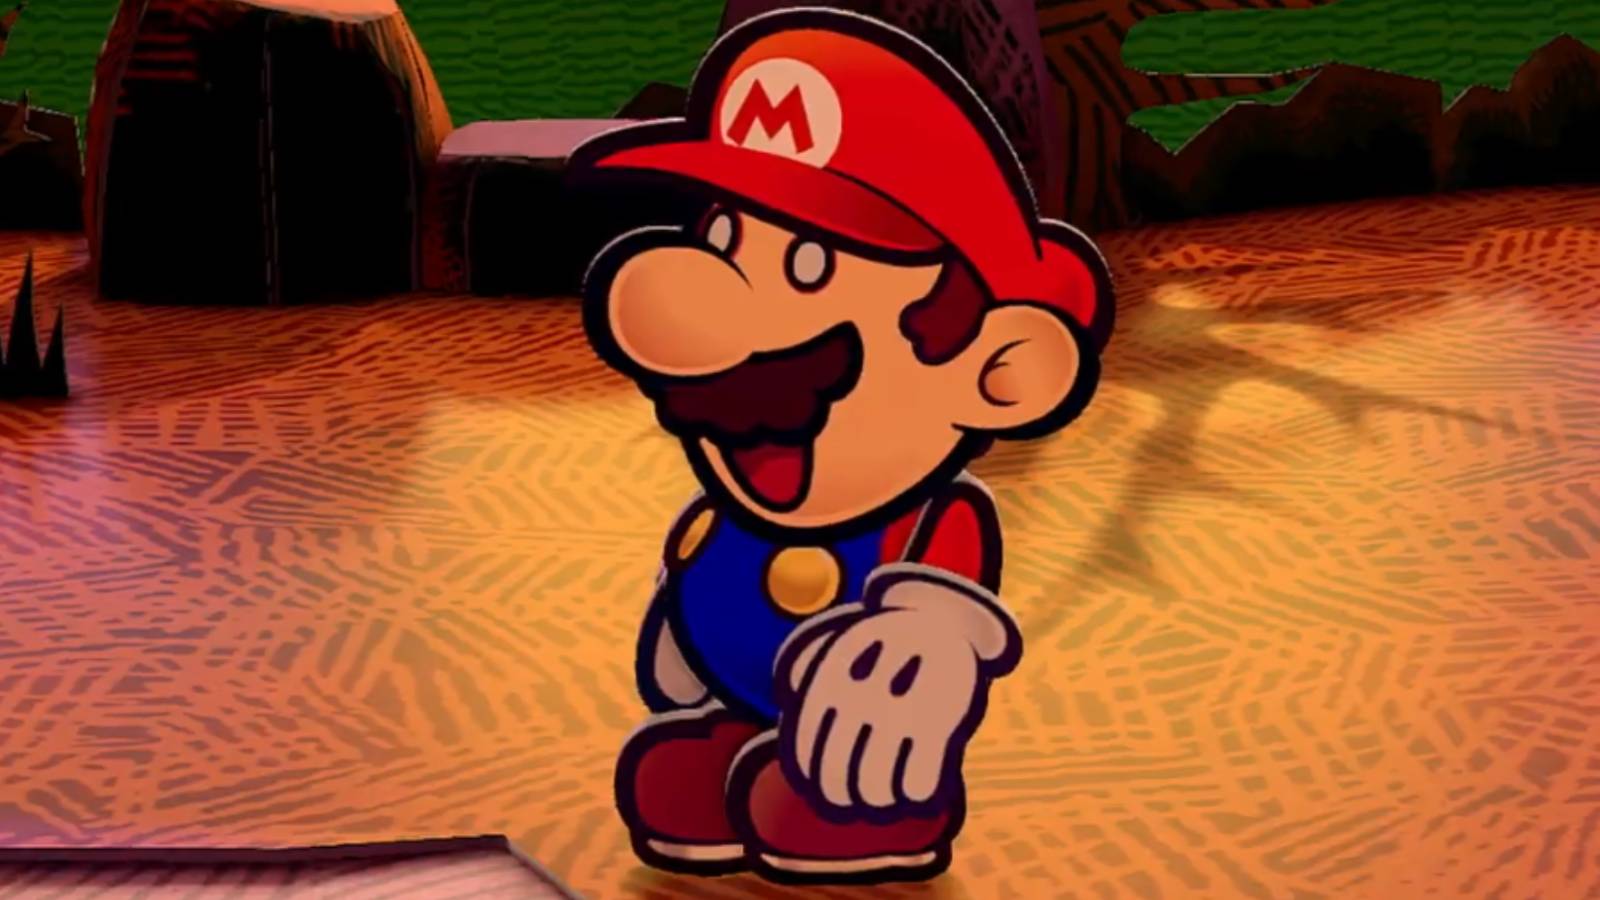 Screenshot from Paper Mario: The Thousand-Year Door on Nintendo Switch.